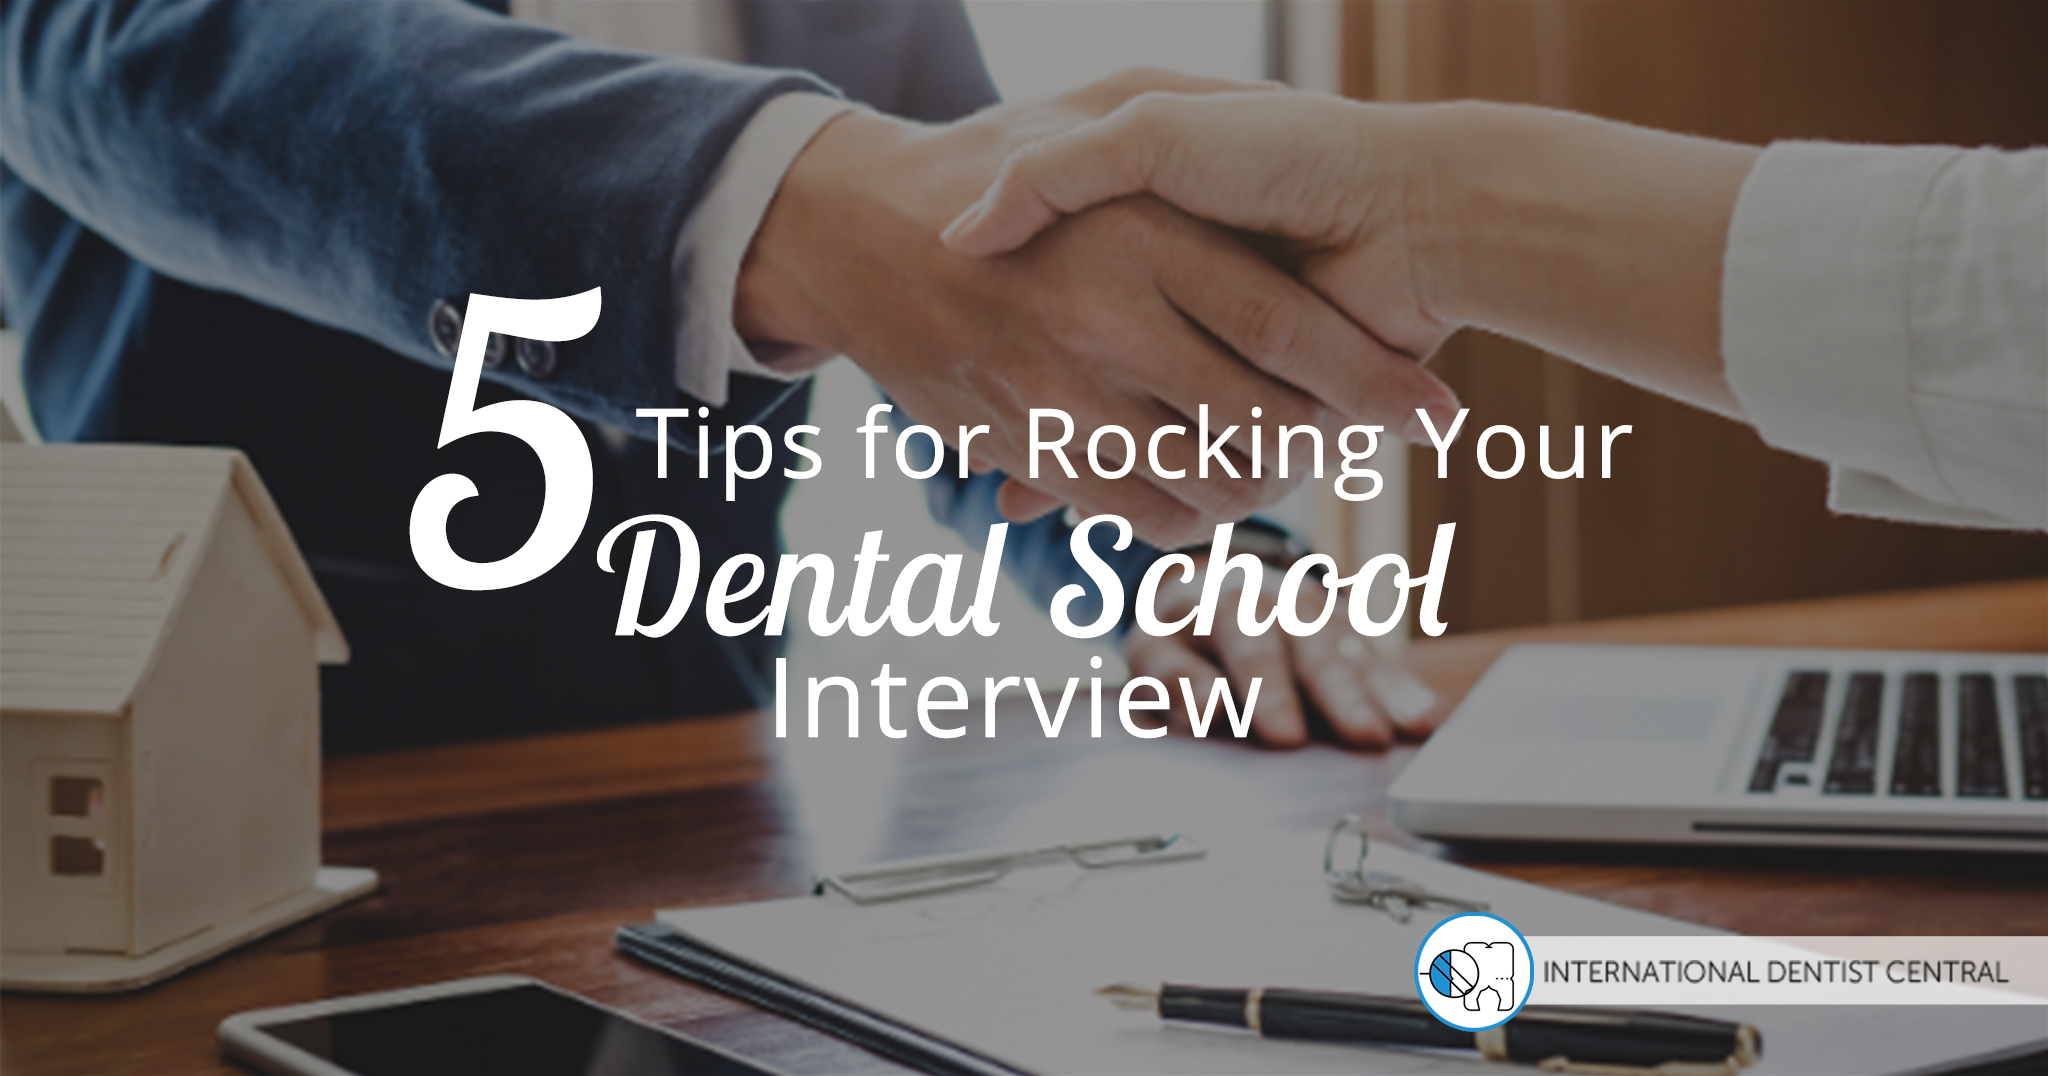 Dental School Interview 5 tips for passing it with 0 stress